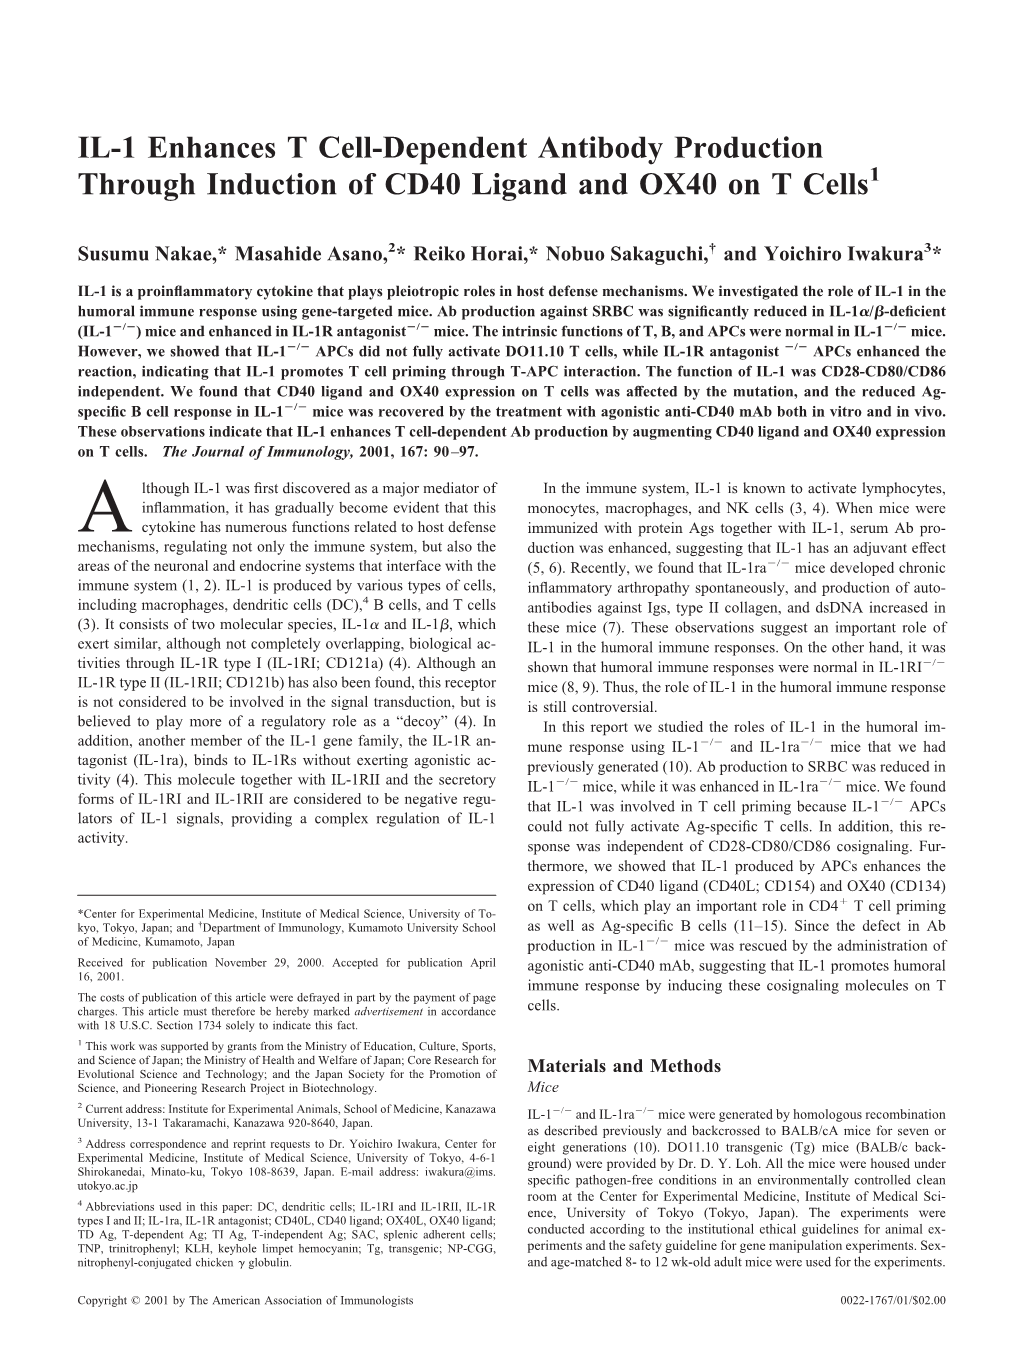 Ligand and OX40 on T Cells Production Through Induction Of